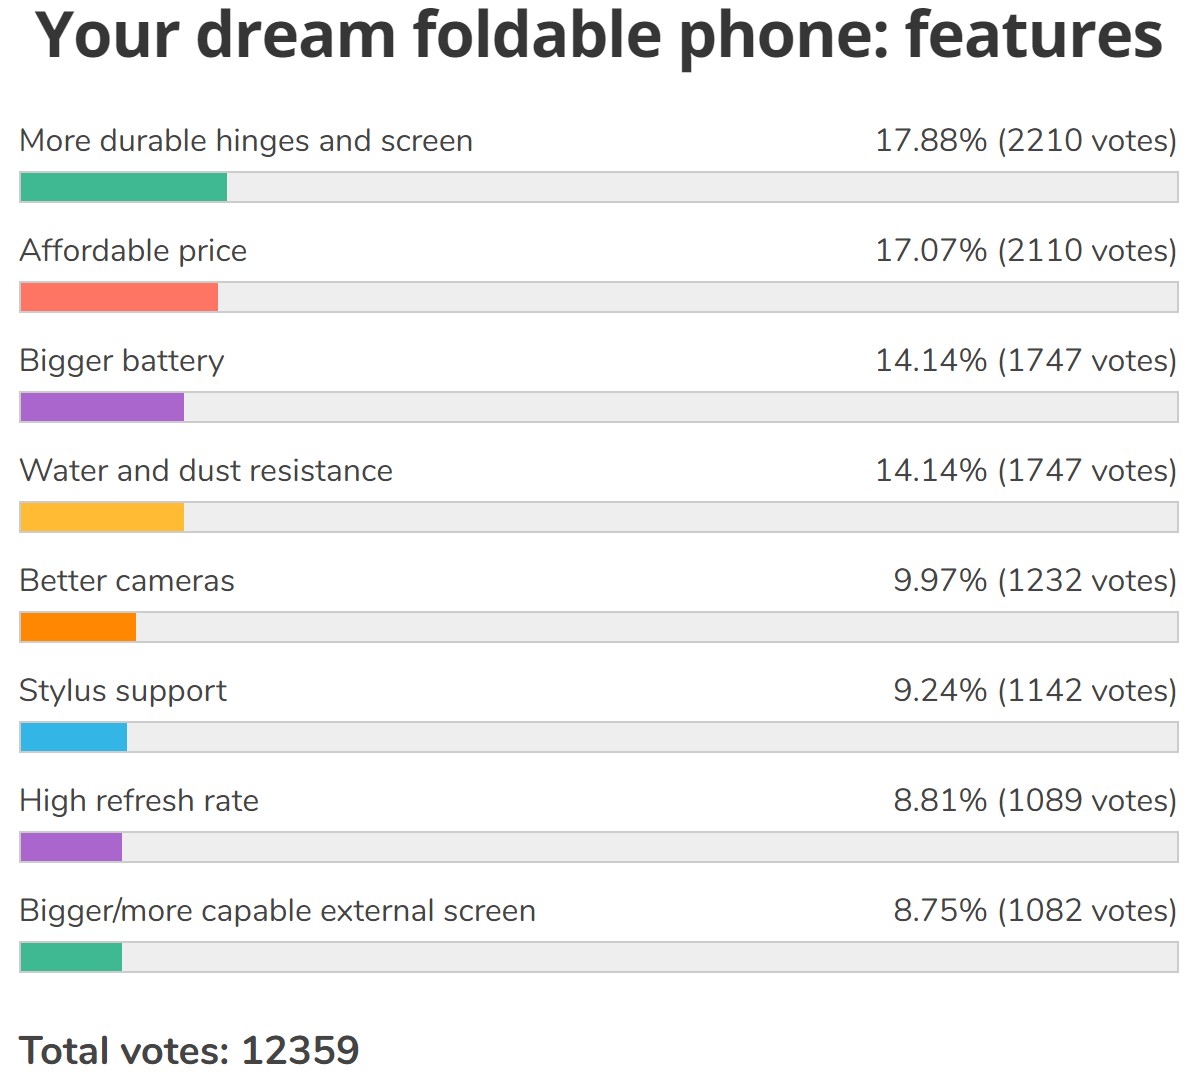 Weekly poll results: rollable phones are the next big thing after foldables